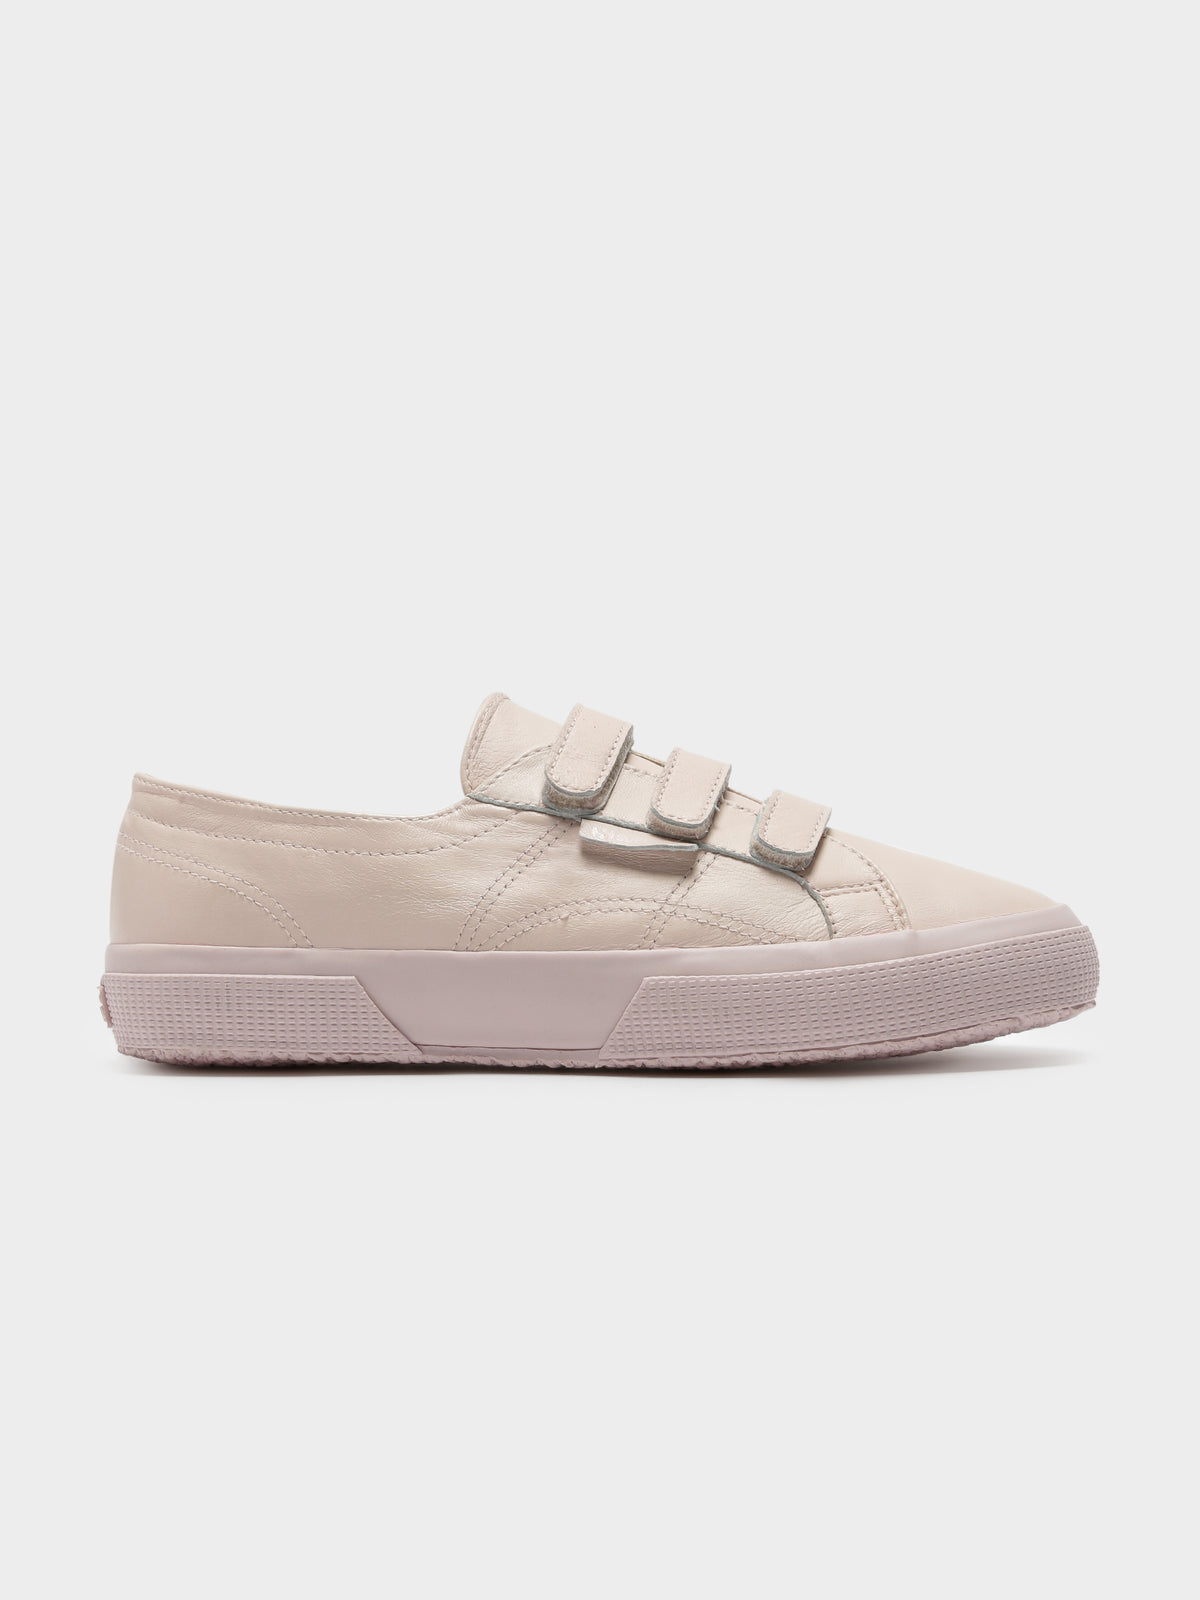 Womens 2750 NAPVW Velcro Sneakers in Pink Skin